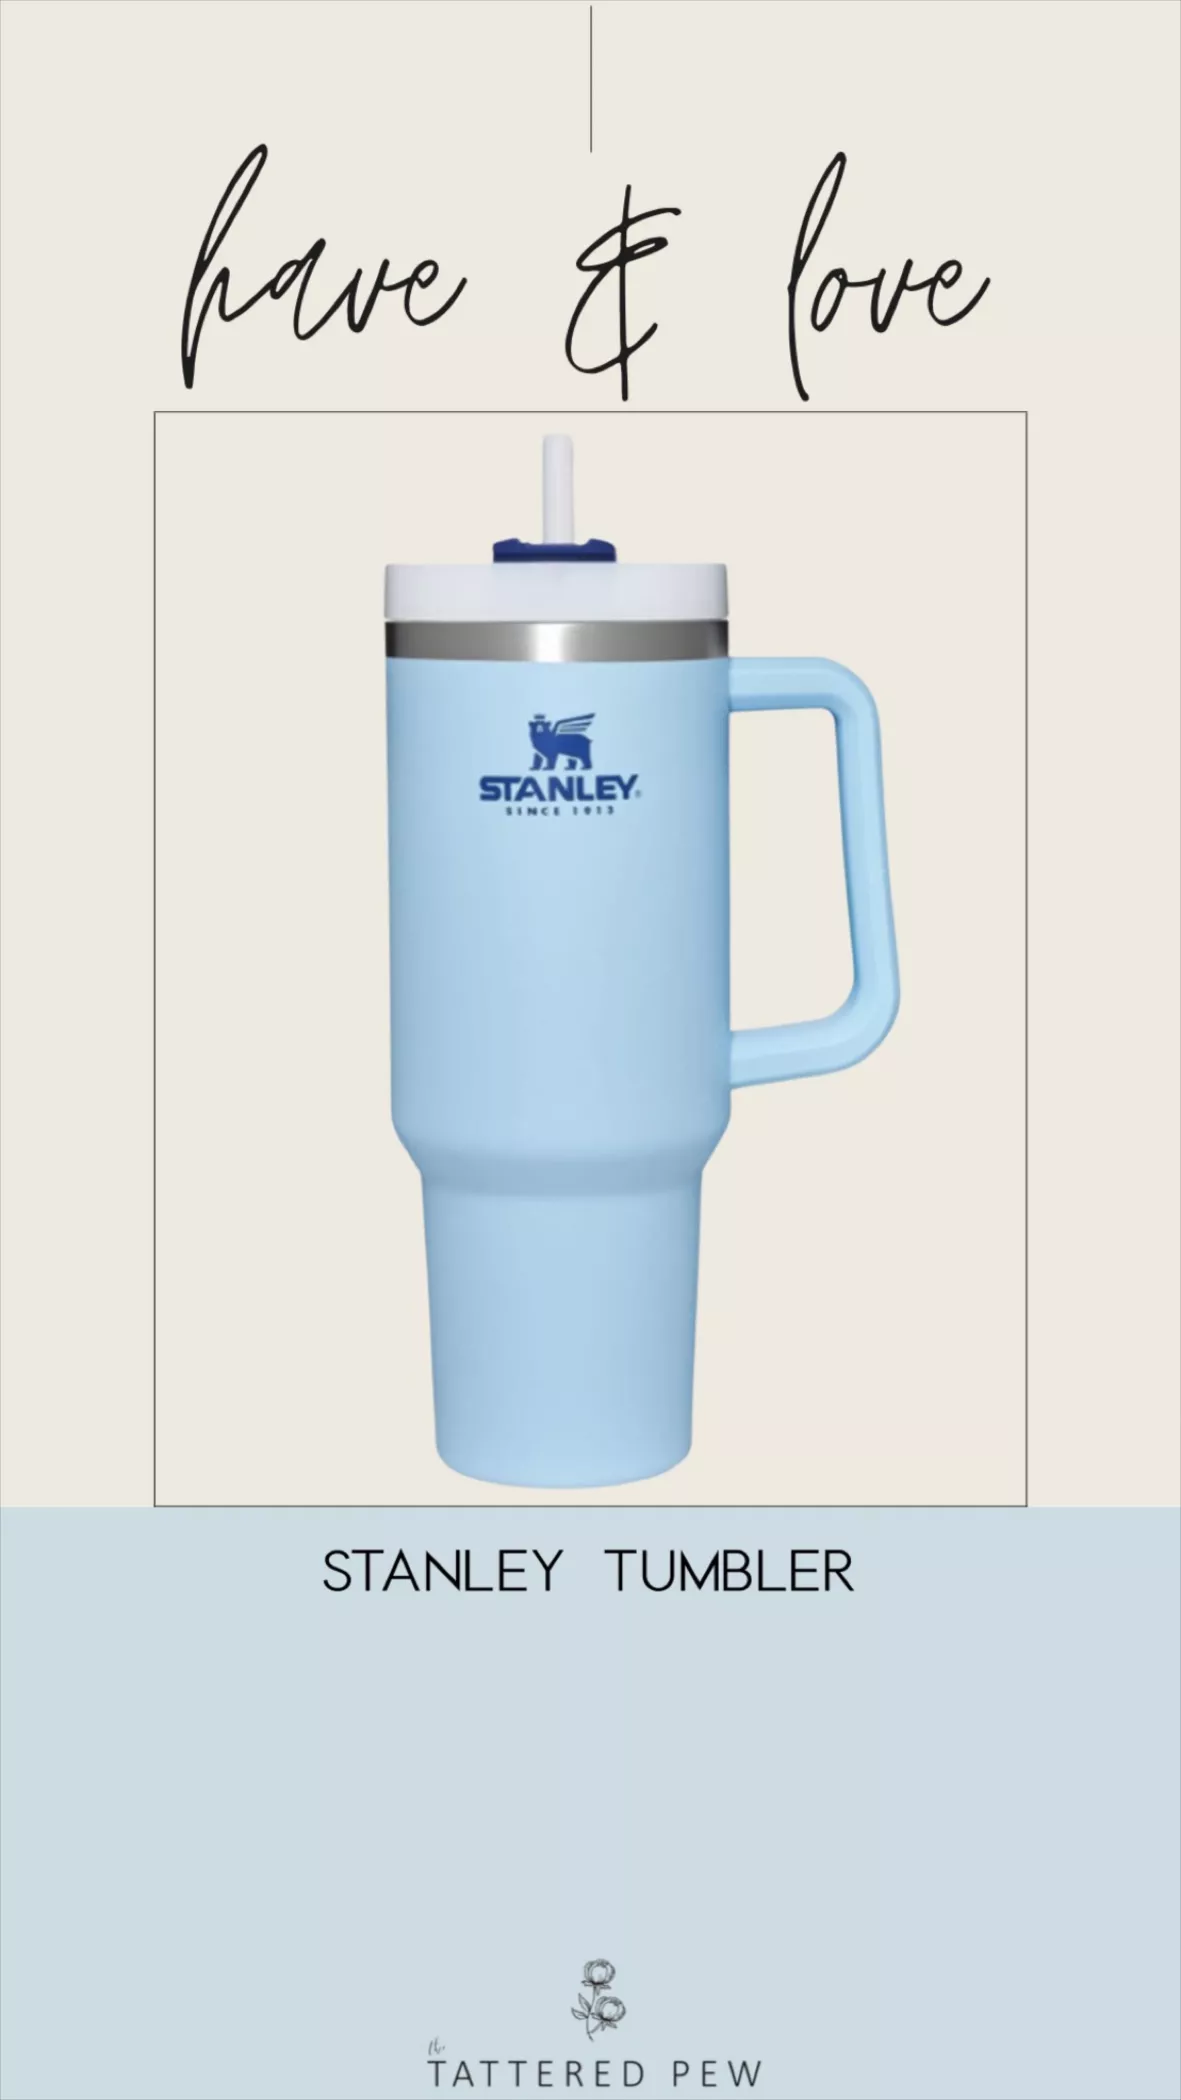 Stanley Quencher: Why are the cups so popular?